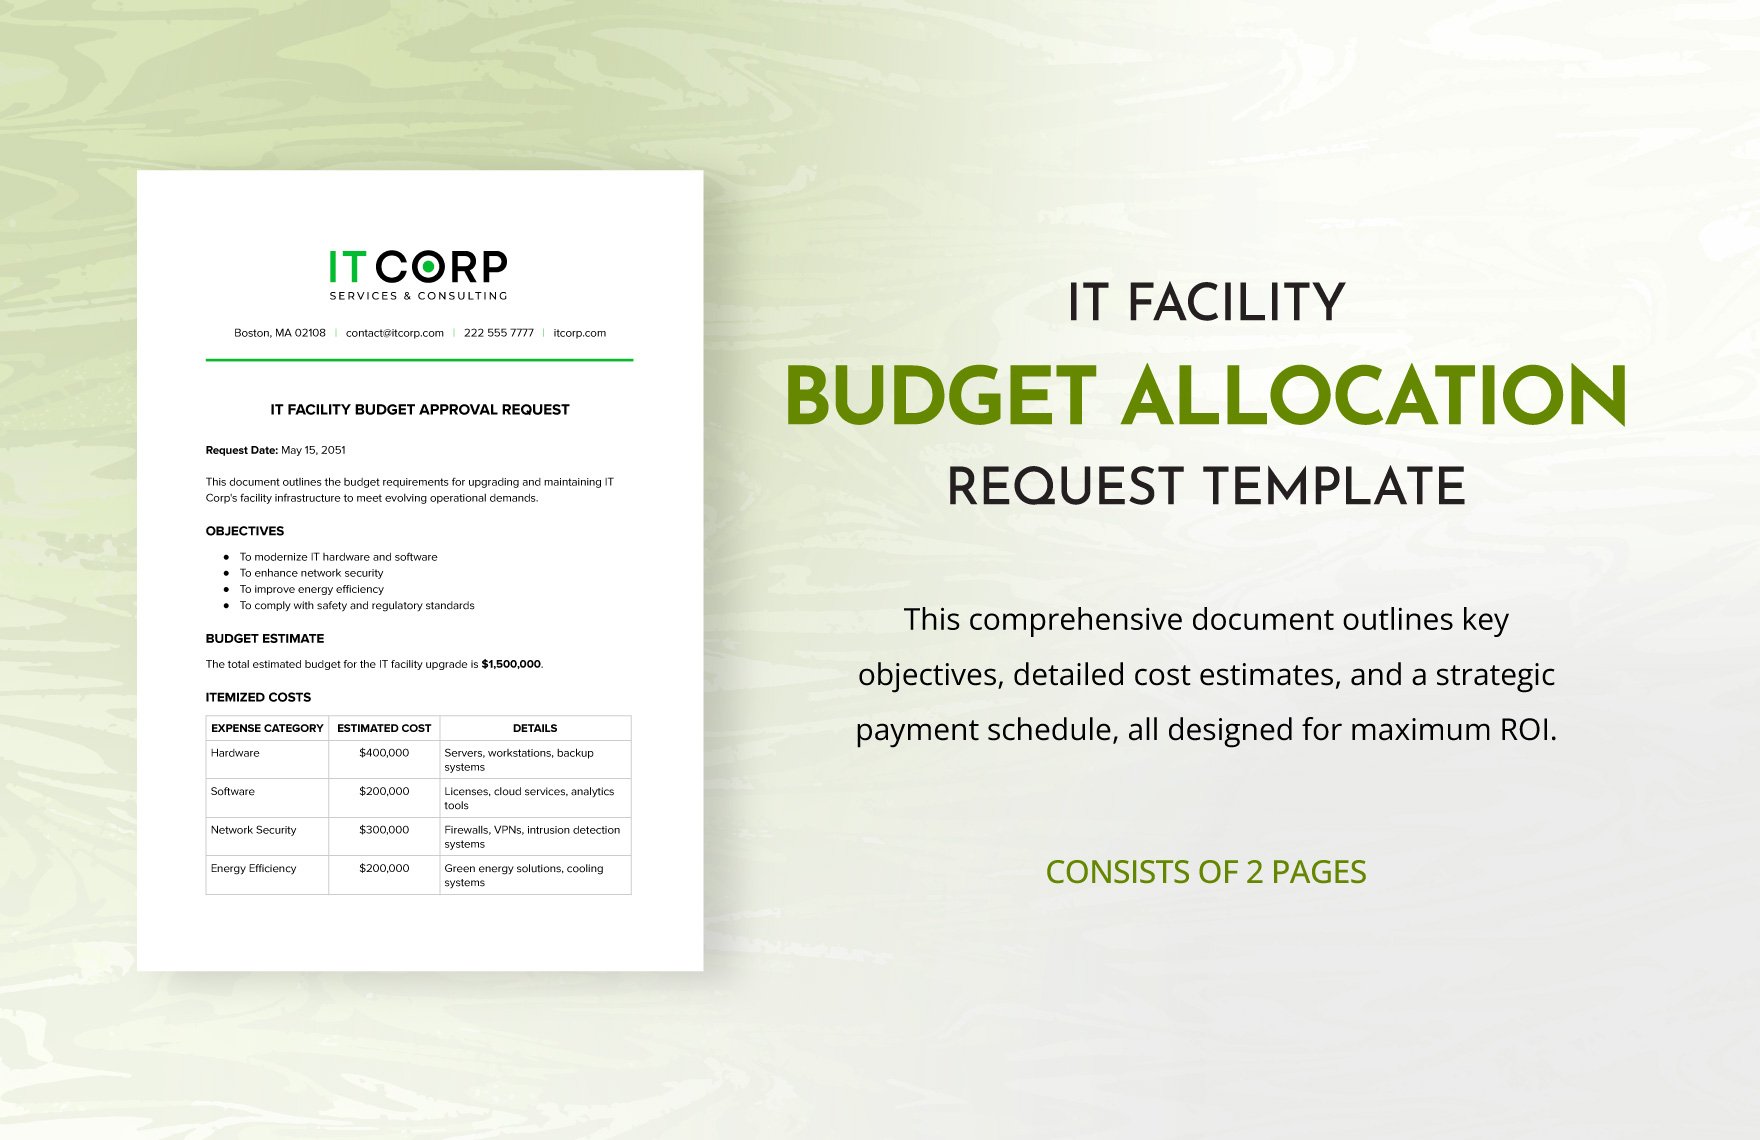 IT Facility Budget Approval Request Template